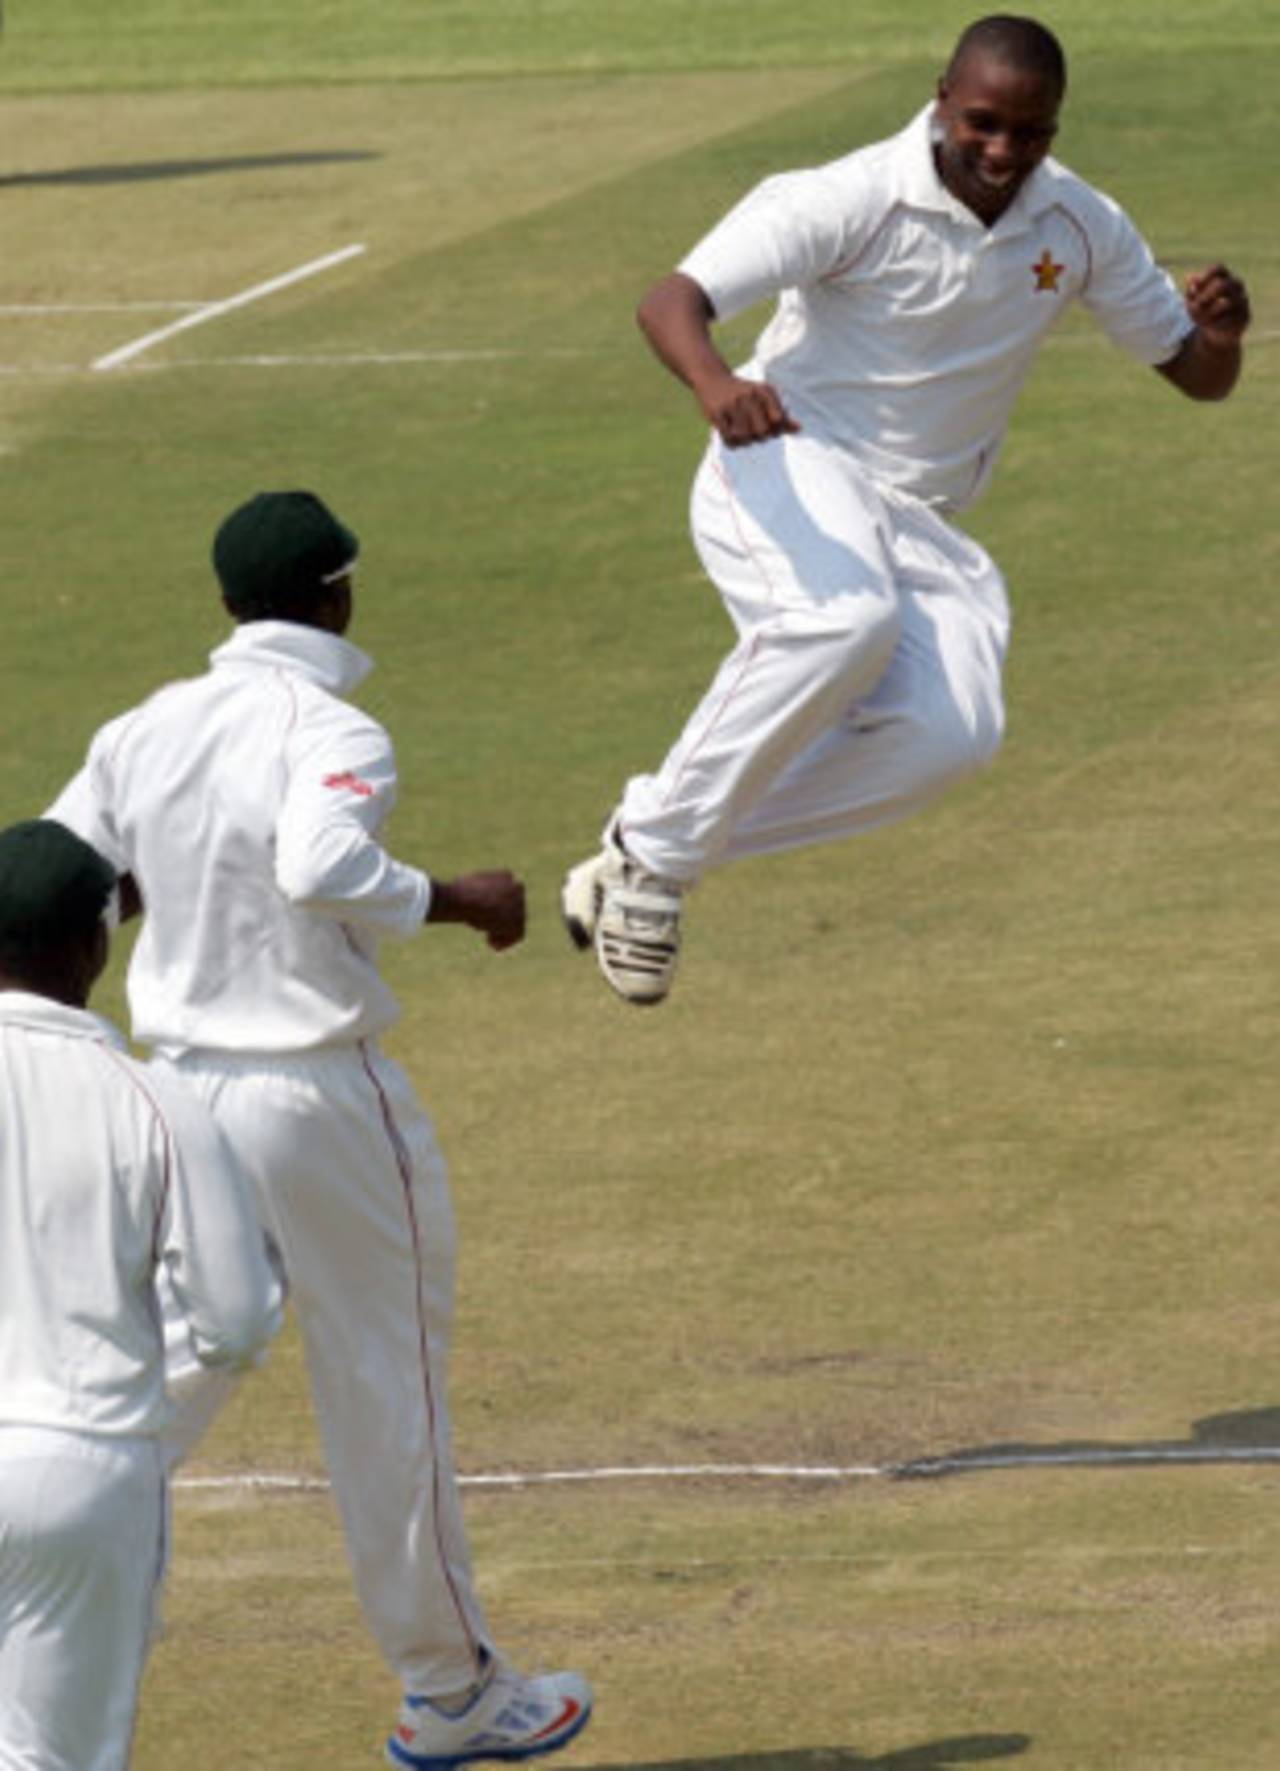 Tinashe Panyangara leaps in the air after removing Khurram Manzoor for 11, Zimbabwe v Pakistan, 1st Test, Harare, 1st day, September 3, 2013